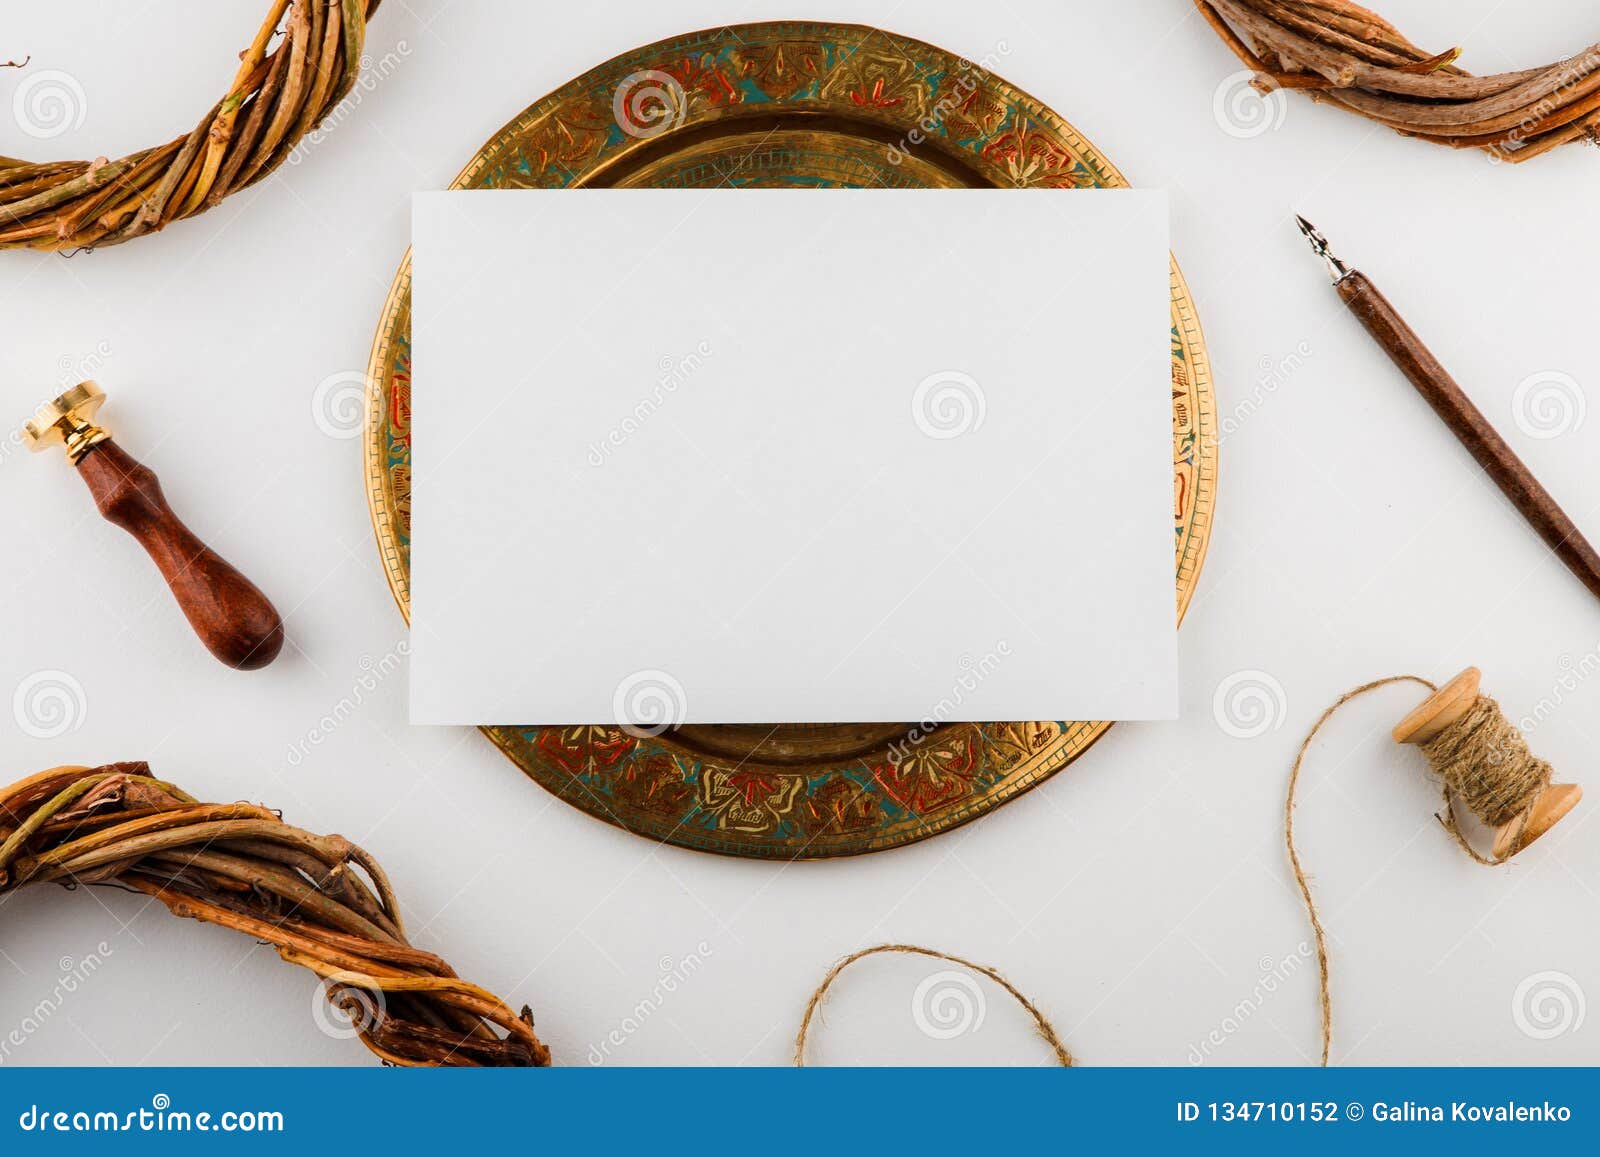 Layout for Invitations. Vintage Style with Natural Materials. Top View ...